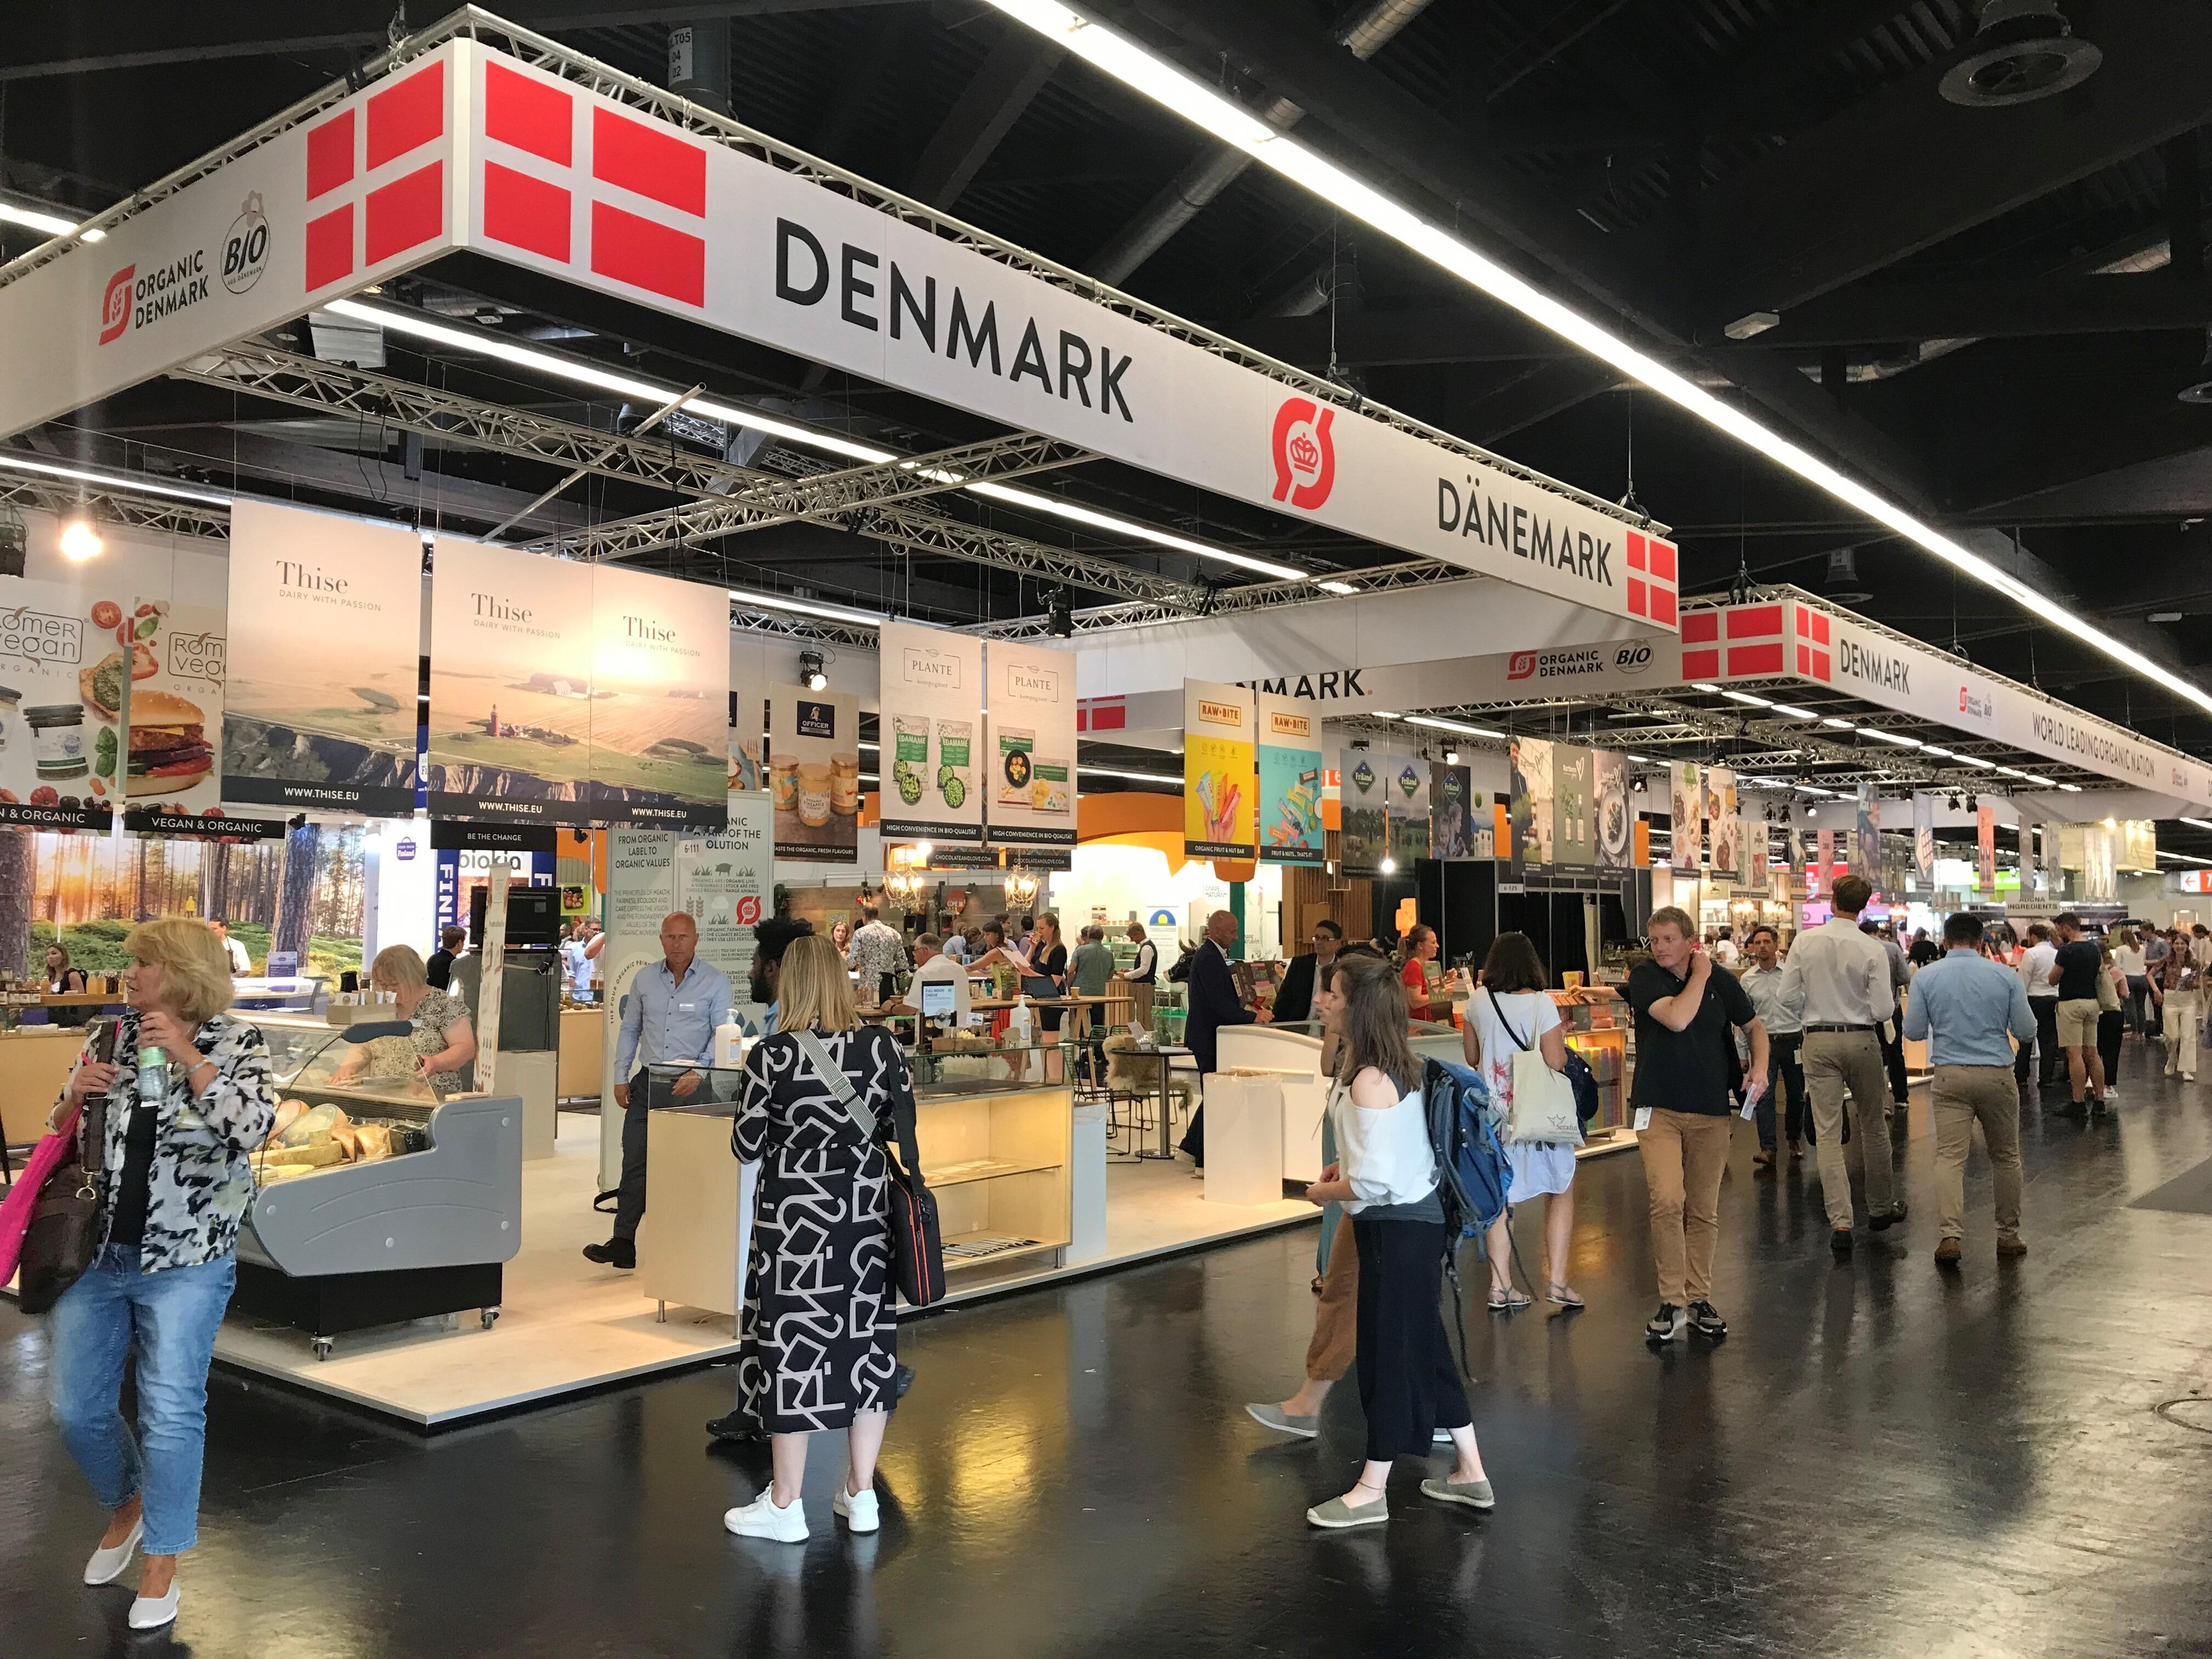 <h3 class="headline-height"><a href="/biofach-nuremberg">EXHIBIT AT BIOFACH 2024</a></h3> <div class="box-height">Join Organic Denmark and Bio Aus Dänemark at the Danish joint stand at BioFach on February 13-16, 2024, in Nuremberg and be a part of the World's Leading Trade Fair for Organic Food.  At our joint stand, we will demonstrate and showcase Denmark's organic excellence and sustainable solutions.</div>